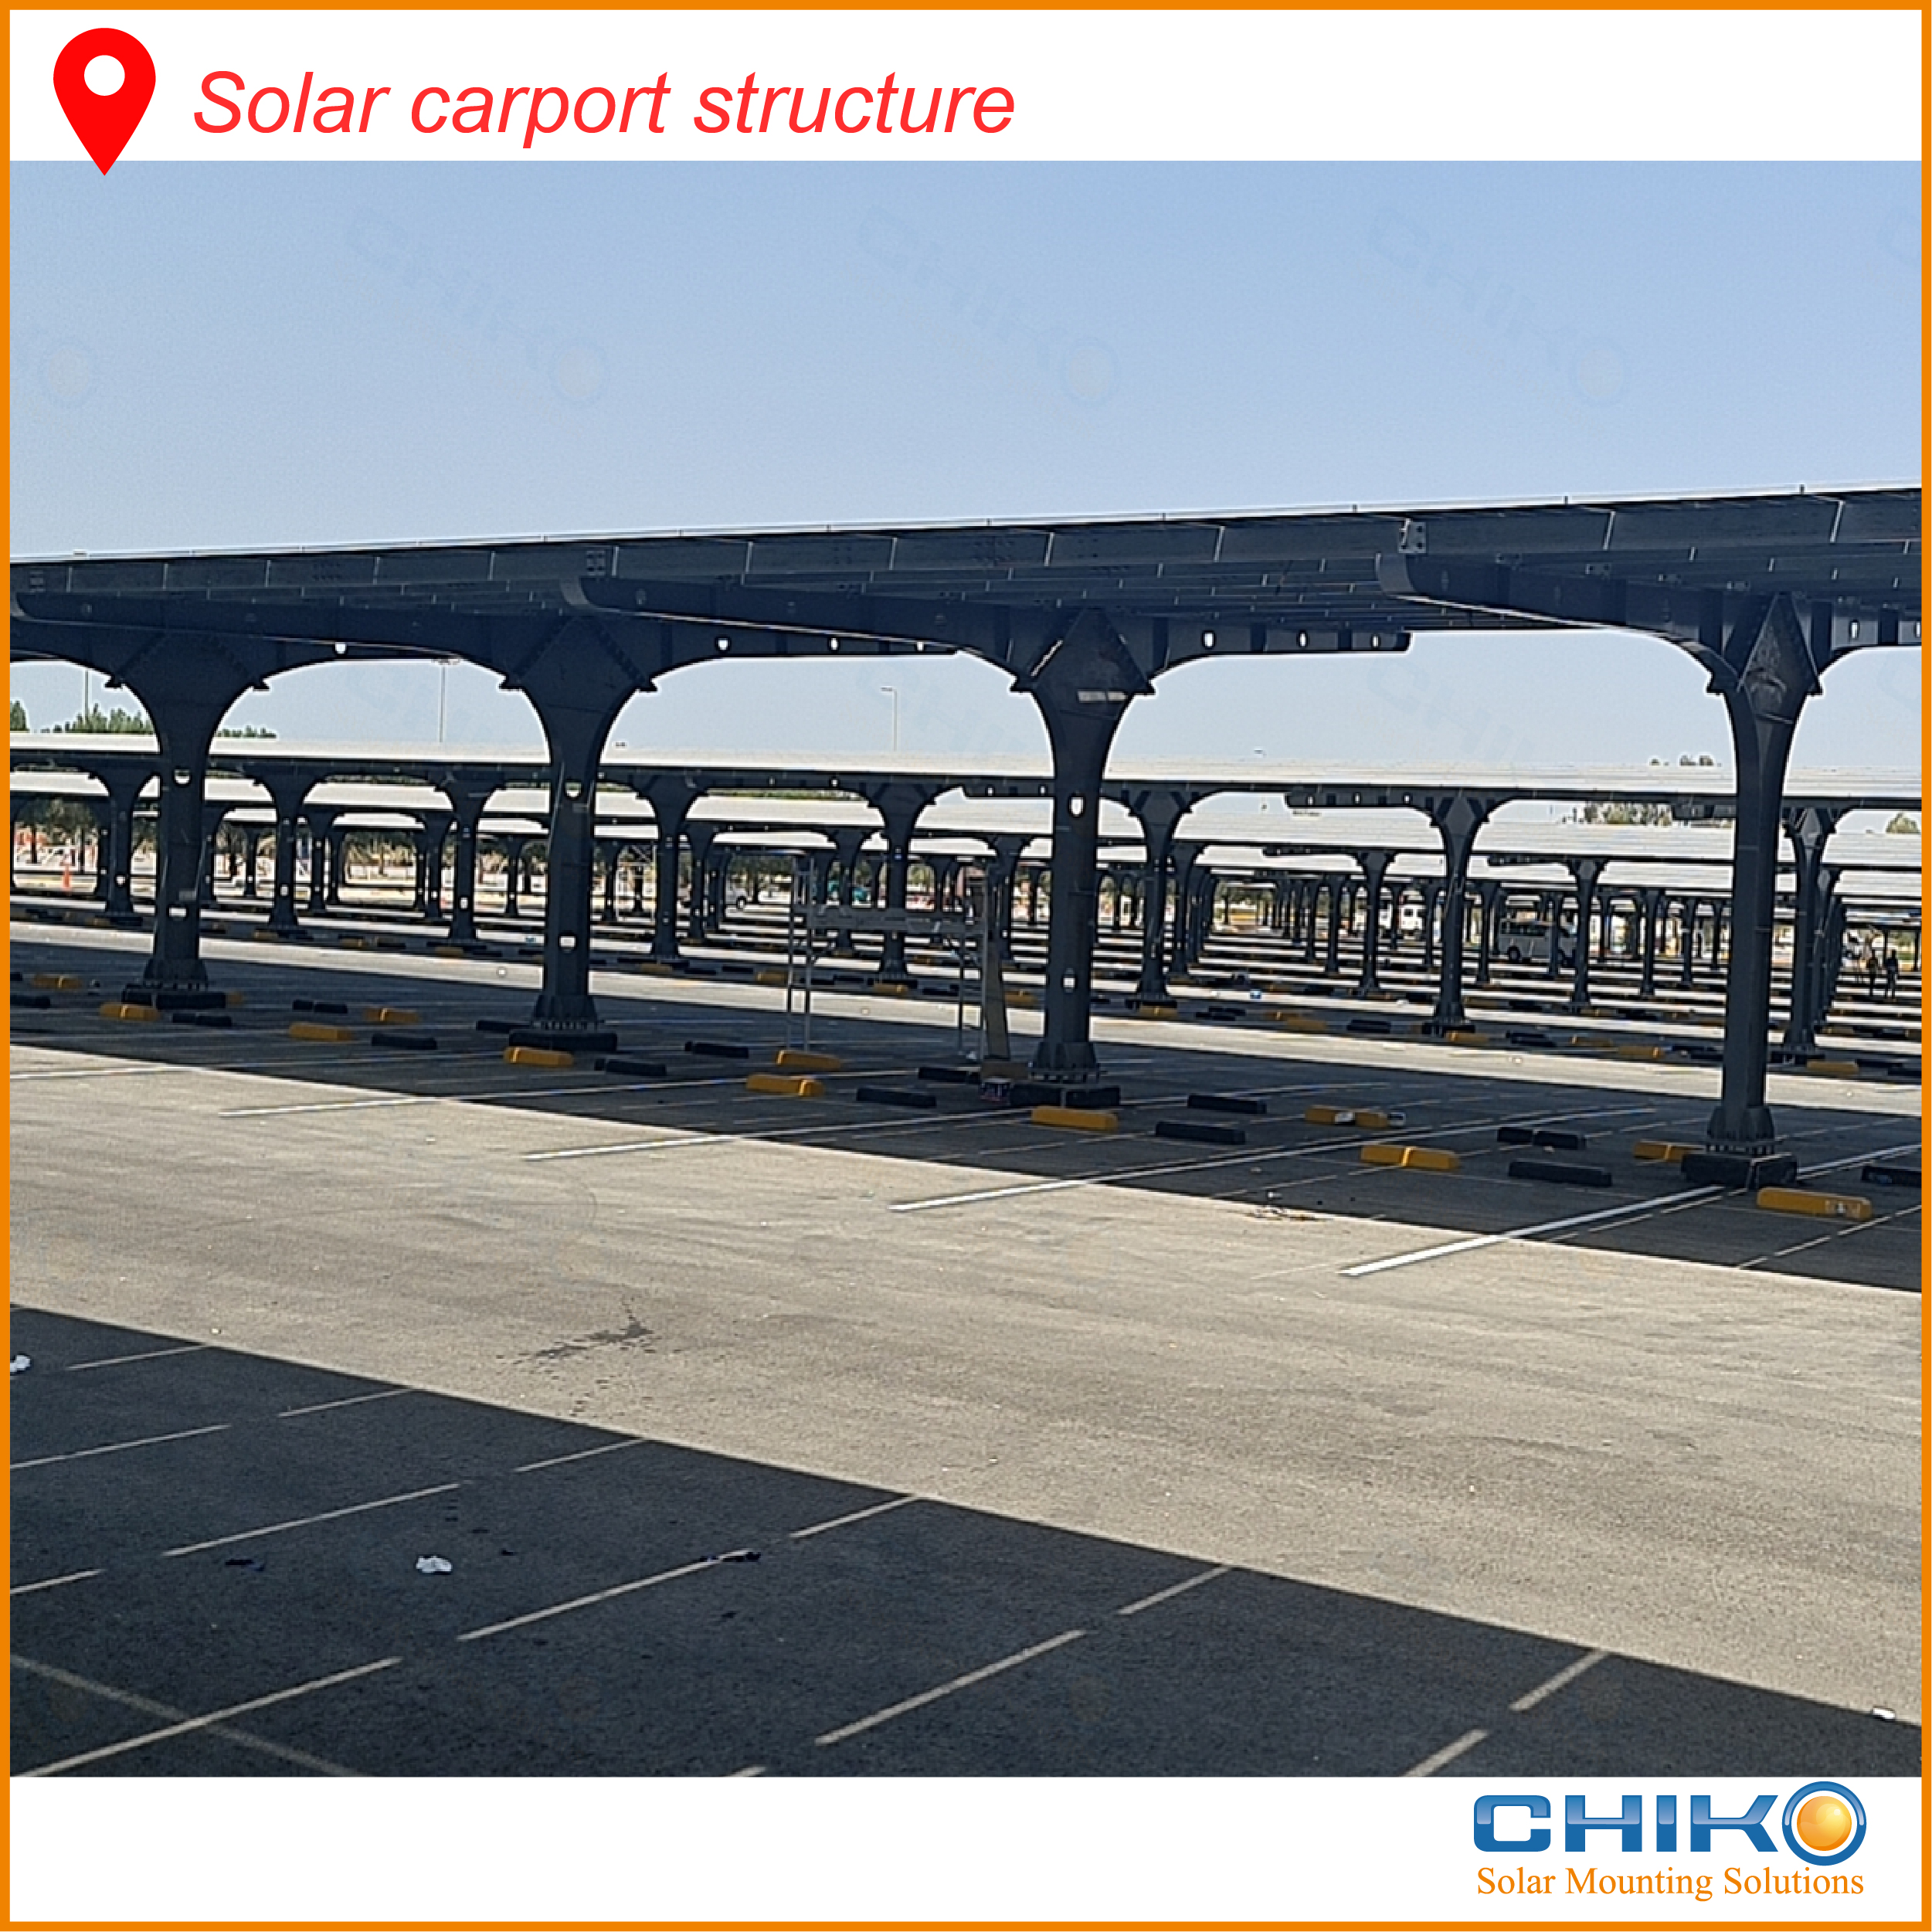 The 4MW solar carport of Bahrain Circuit was successfully completed